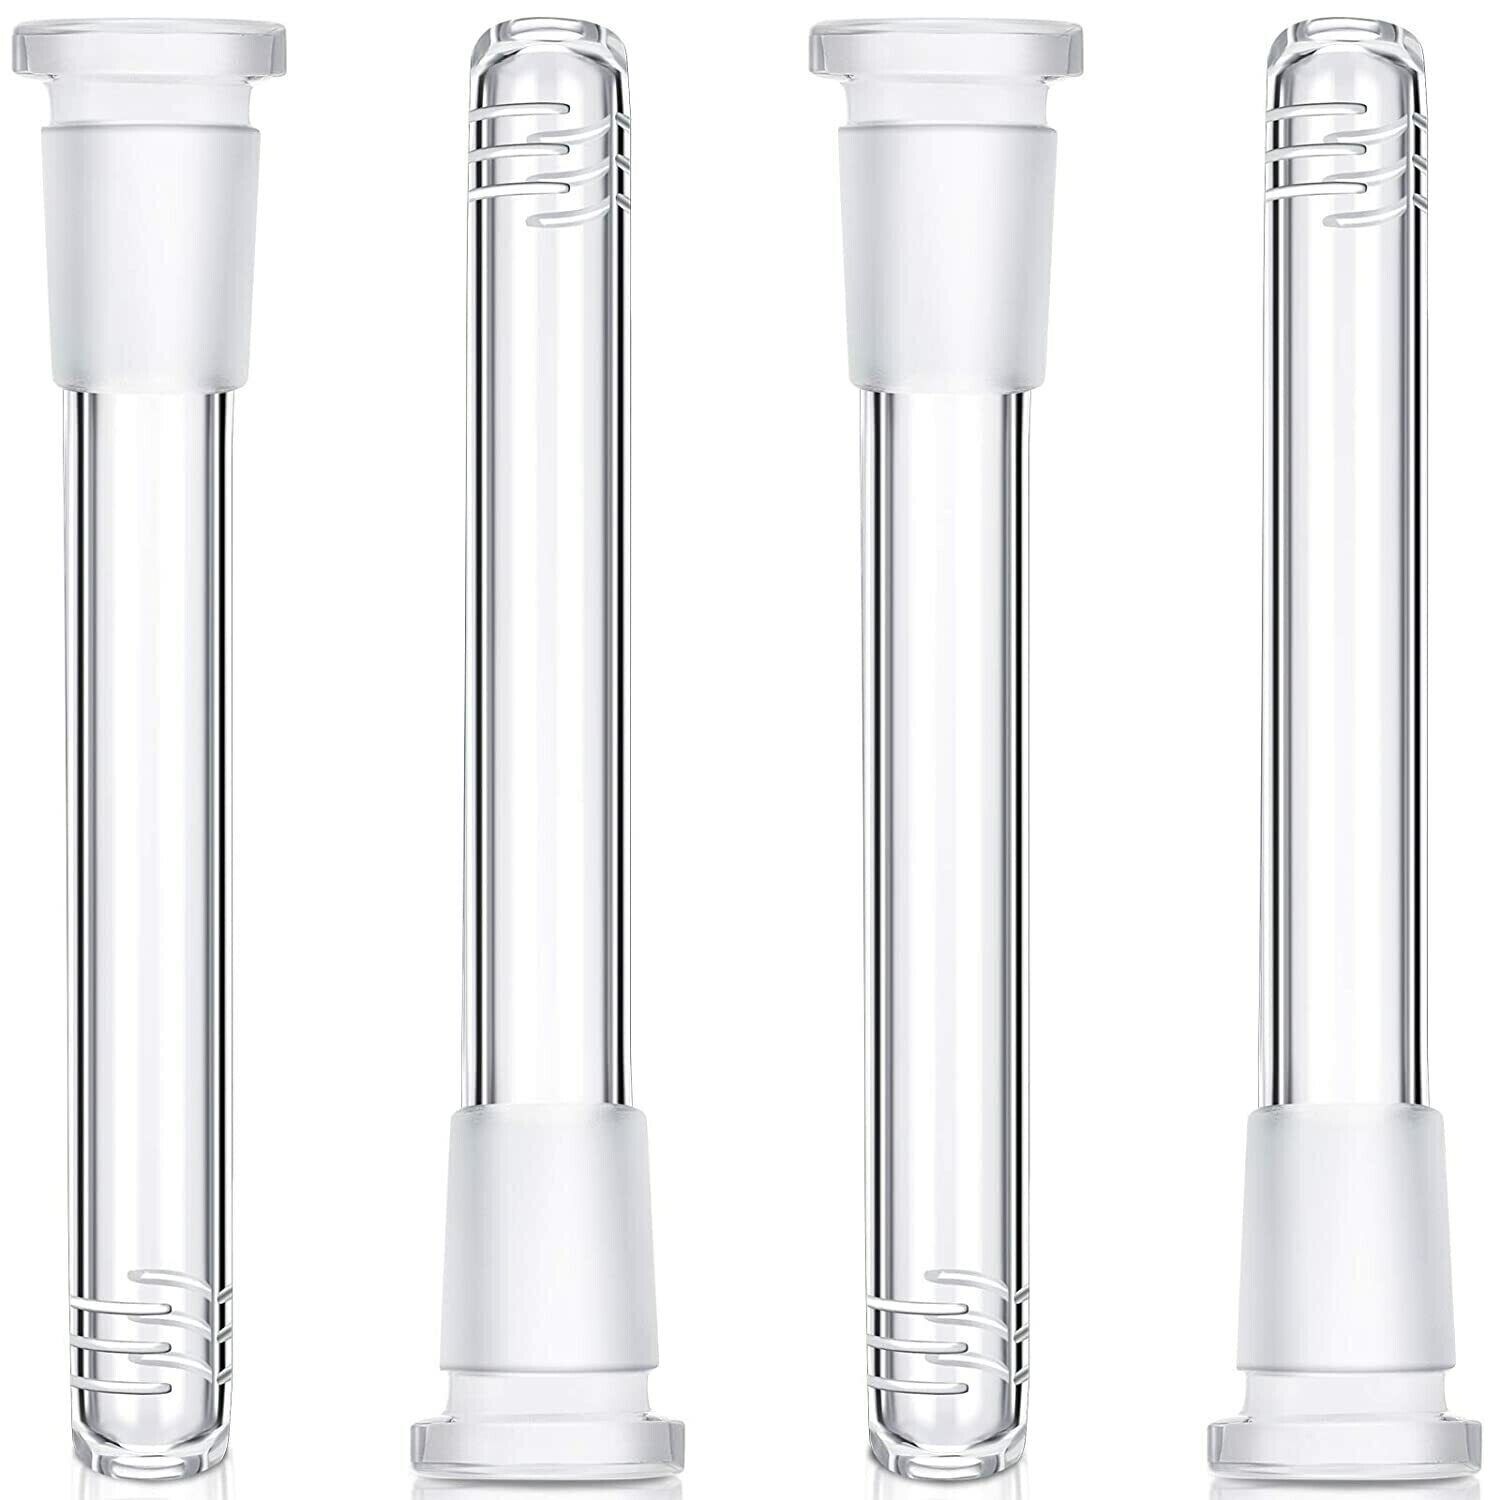 4PACK 4.5in Glass Downstem fit 14mm Male Bowl for 8''/9''/10''/12'' Filter Bong